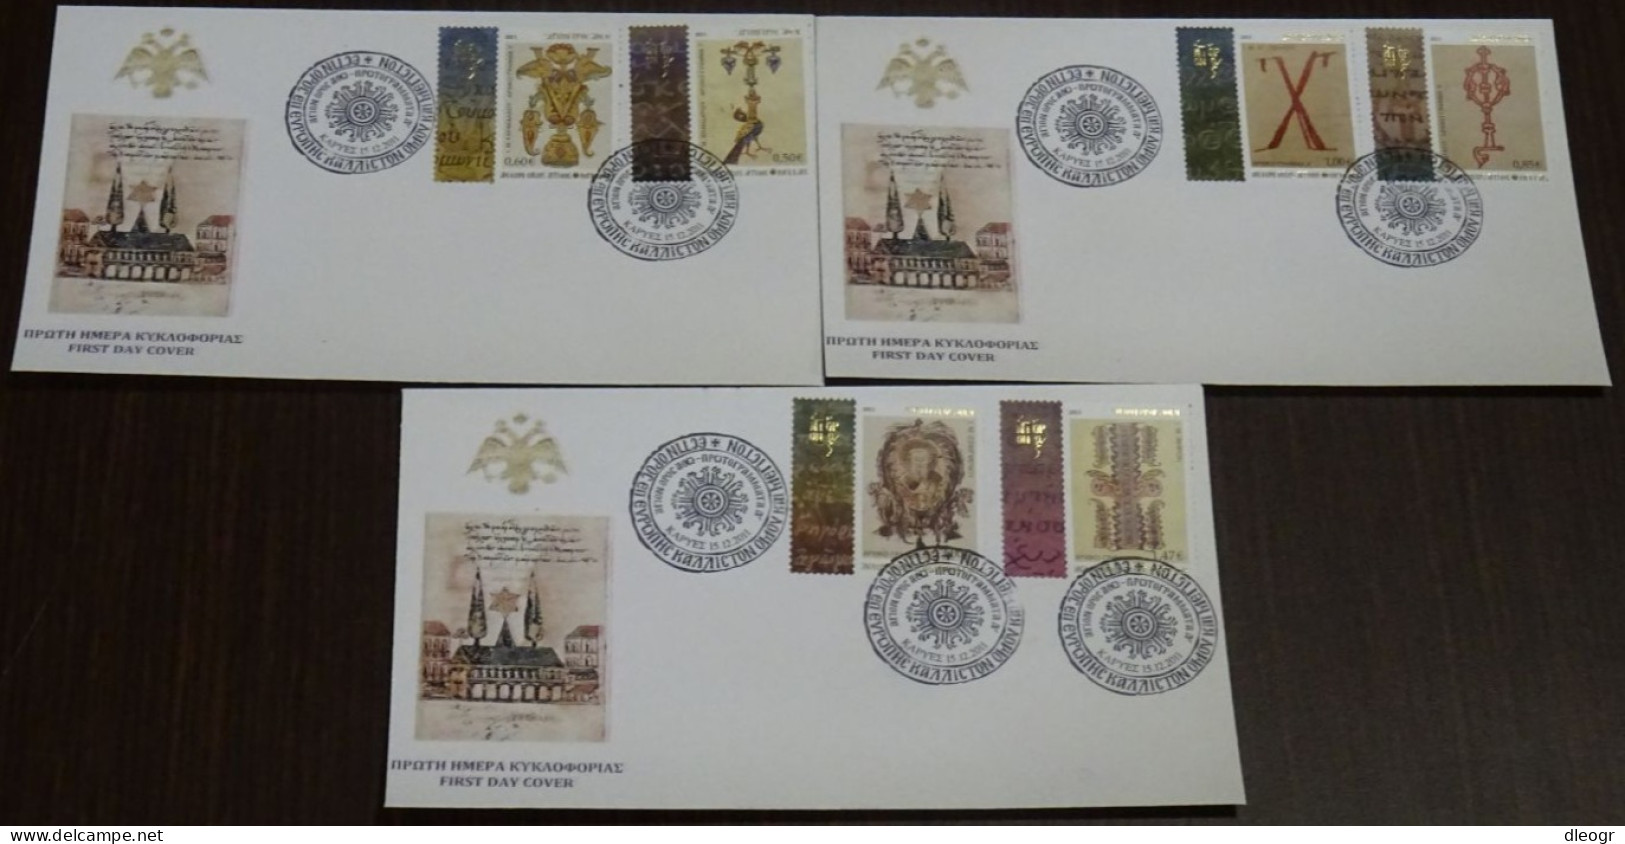 Greece Mount Athos 2011 Initial Letters IV Unofficial FDC - FDC